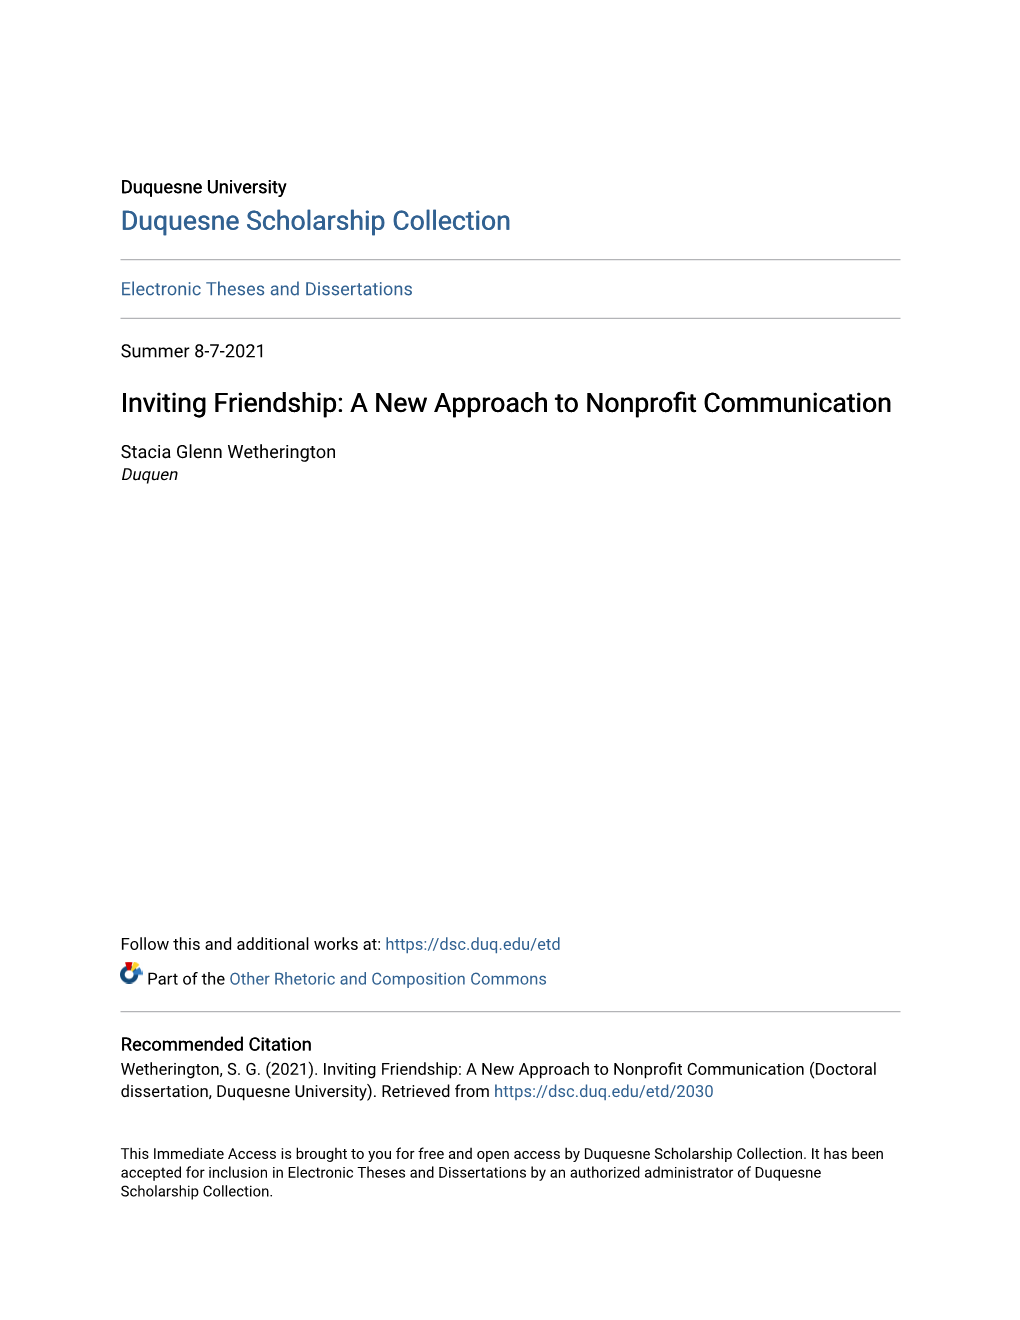 Inviting Friendship: a New Approach to Nonprofit Communication